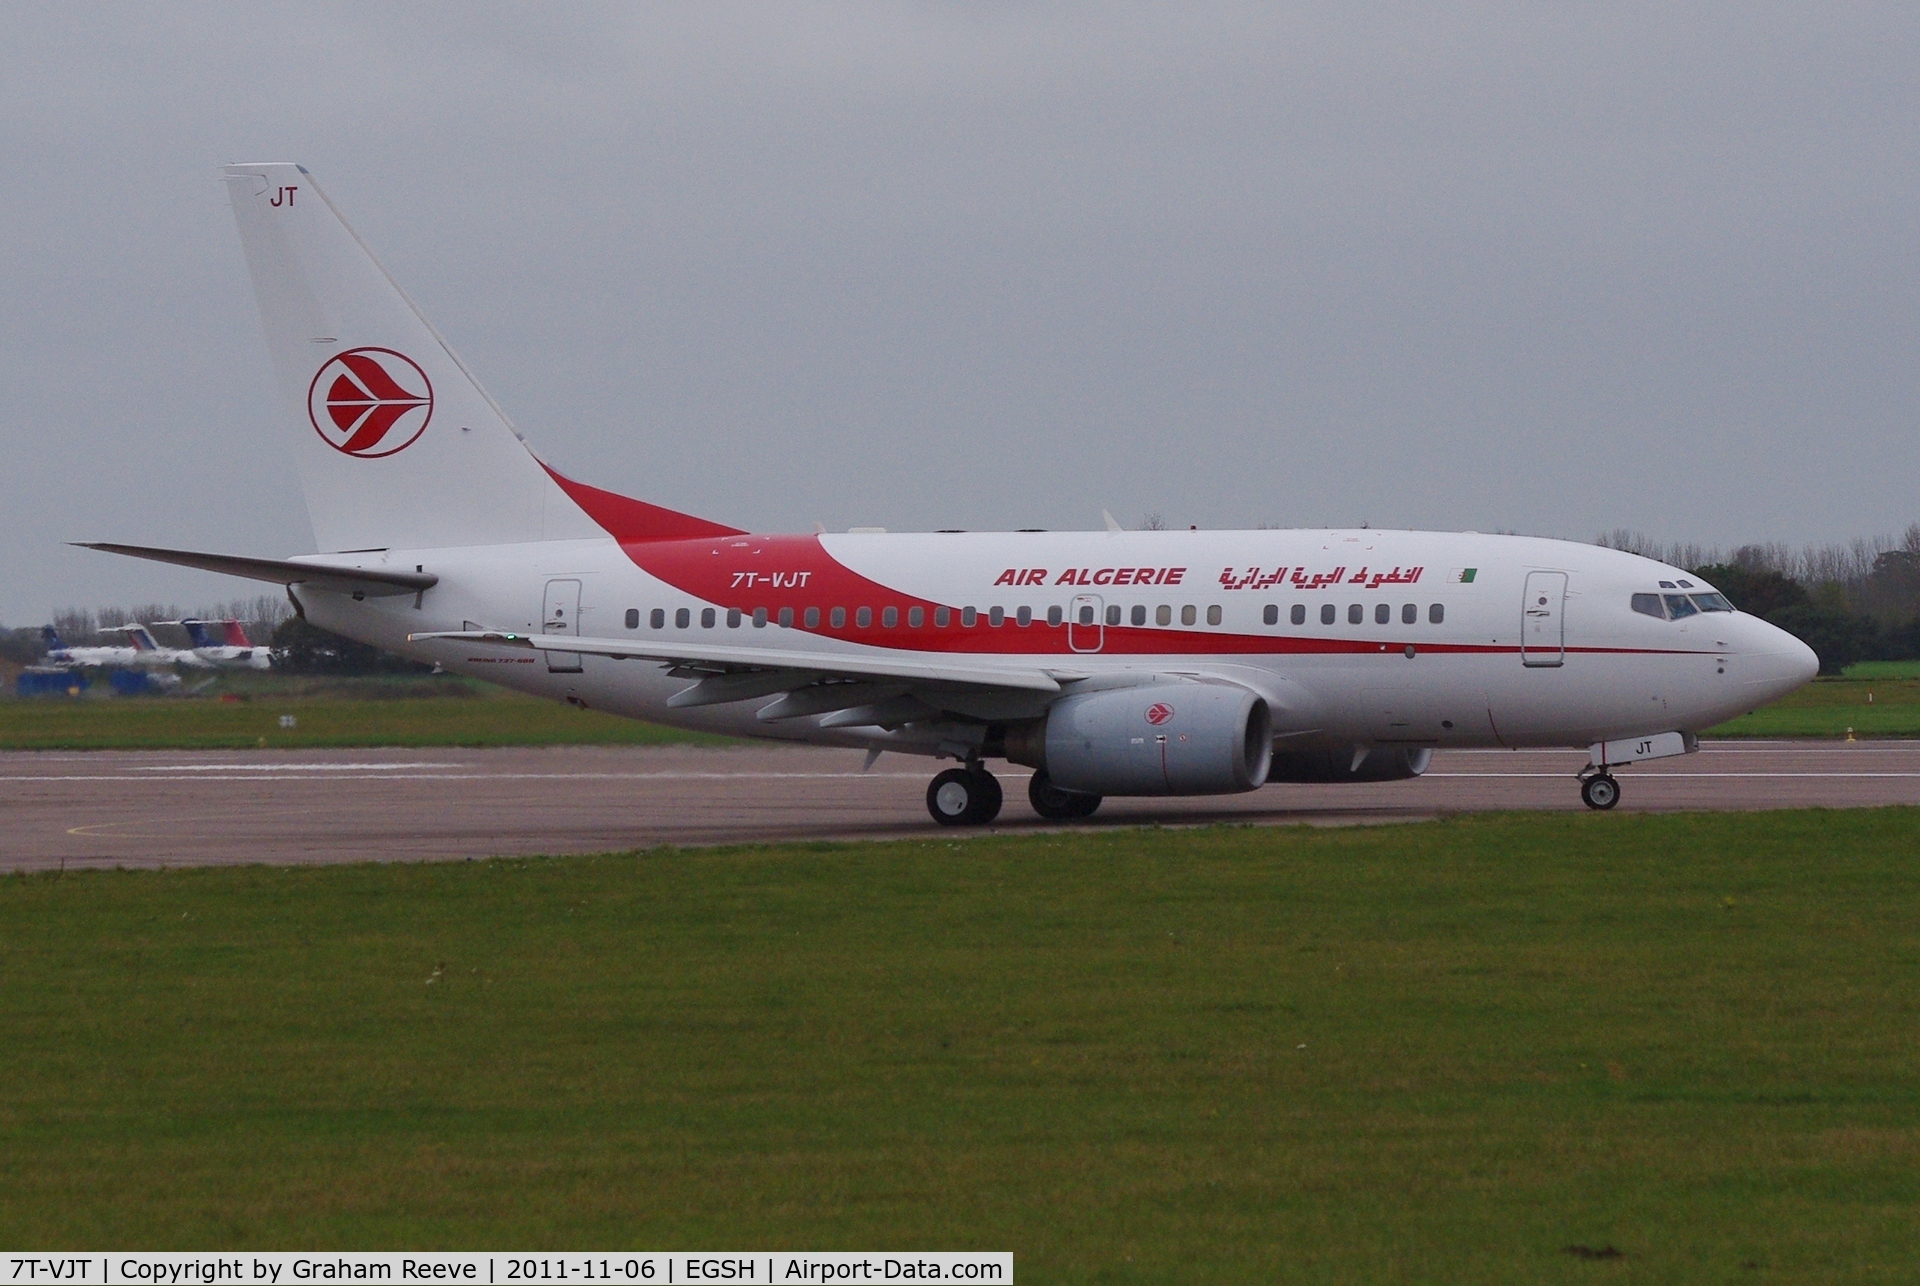 7T-VJT, 2002 Boeing 737-6D6 C/N 30546, About to depart after respray.